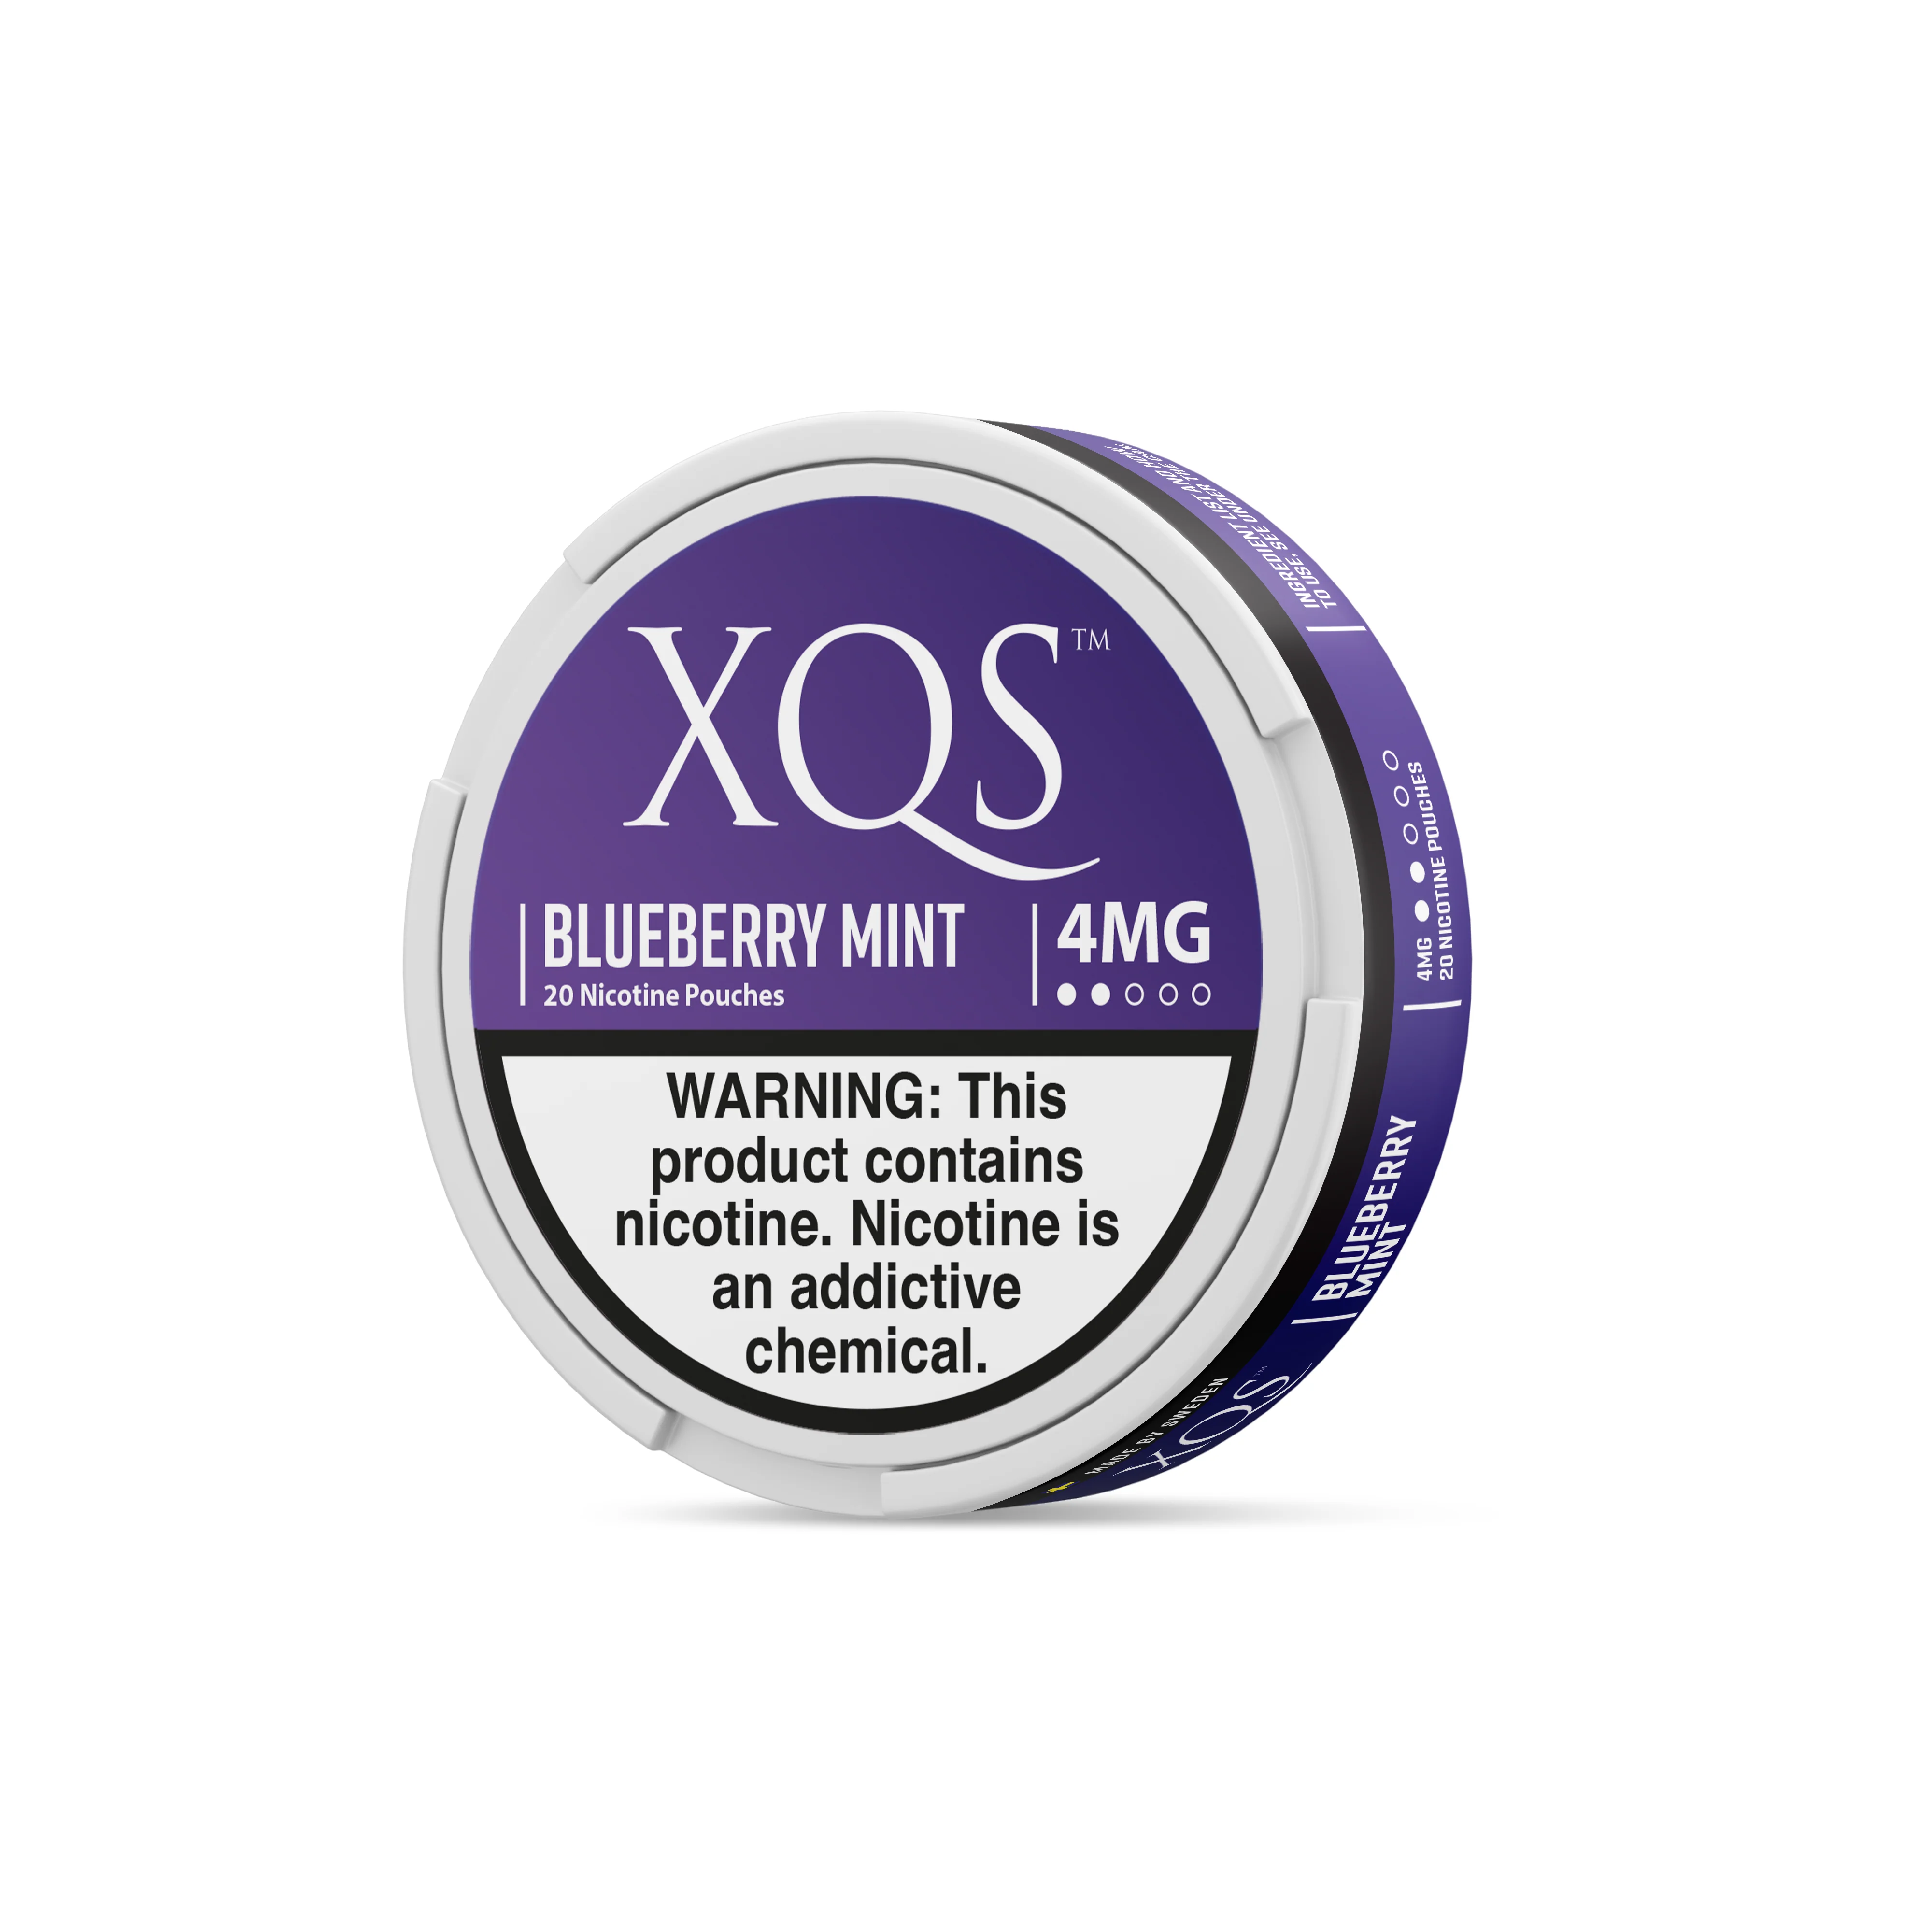 Xqs blueberry mint 4mg nicotine pouch